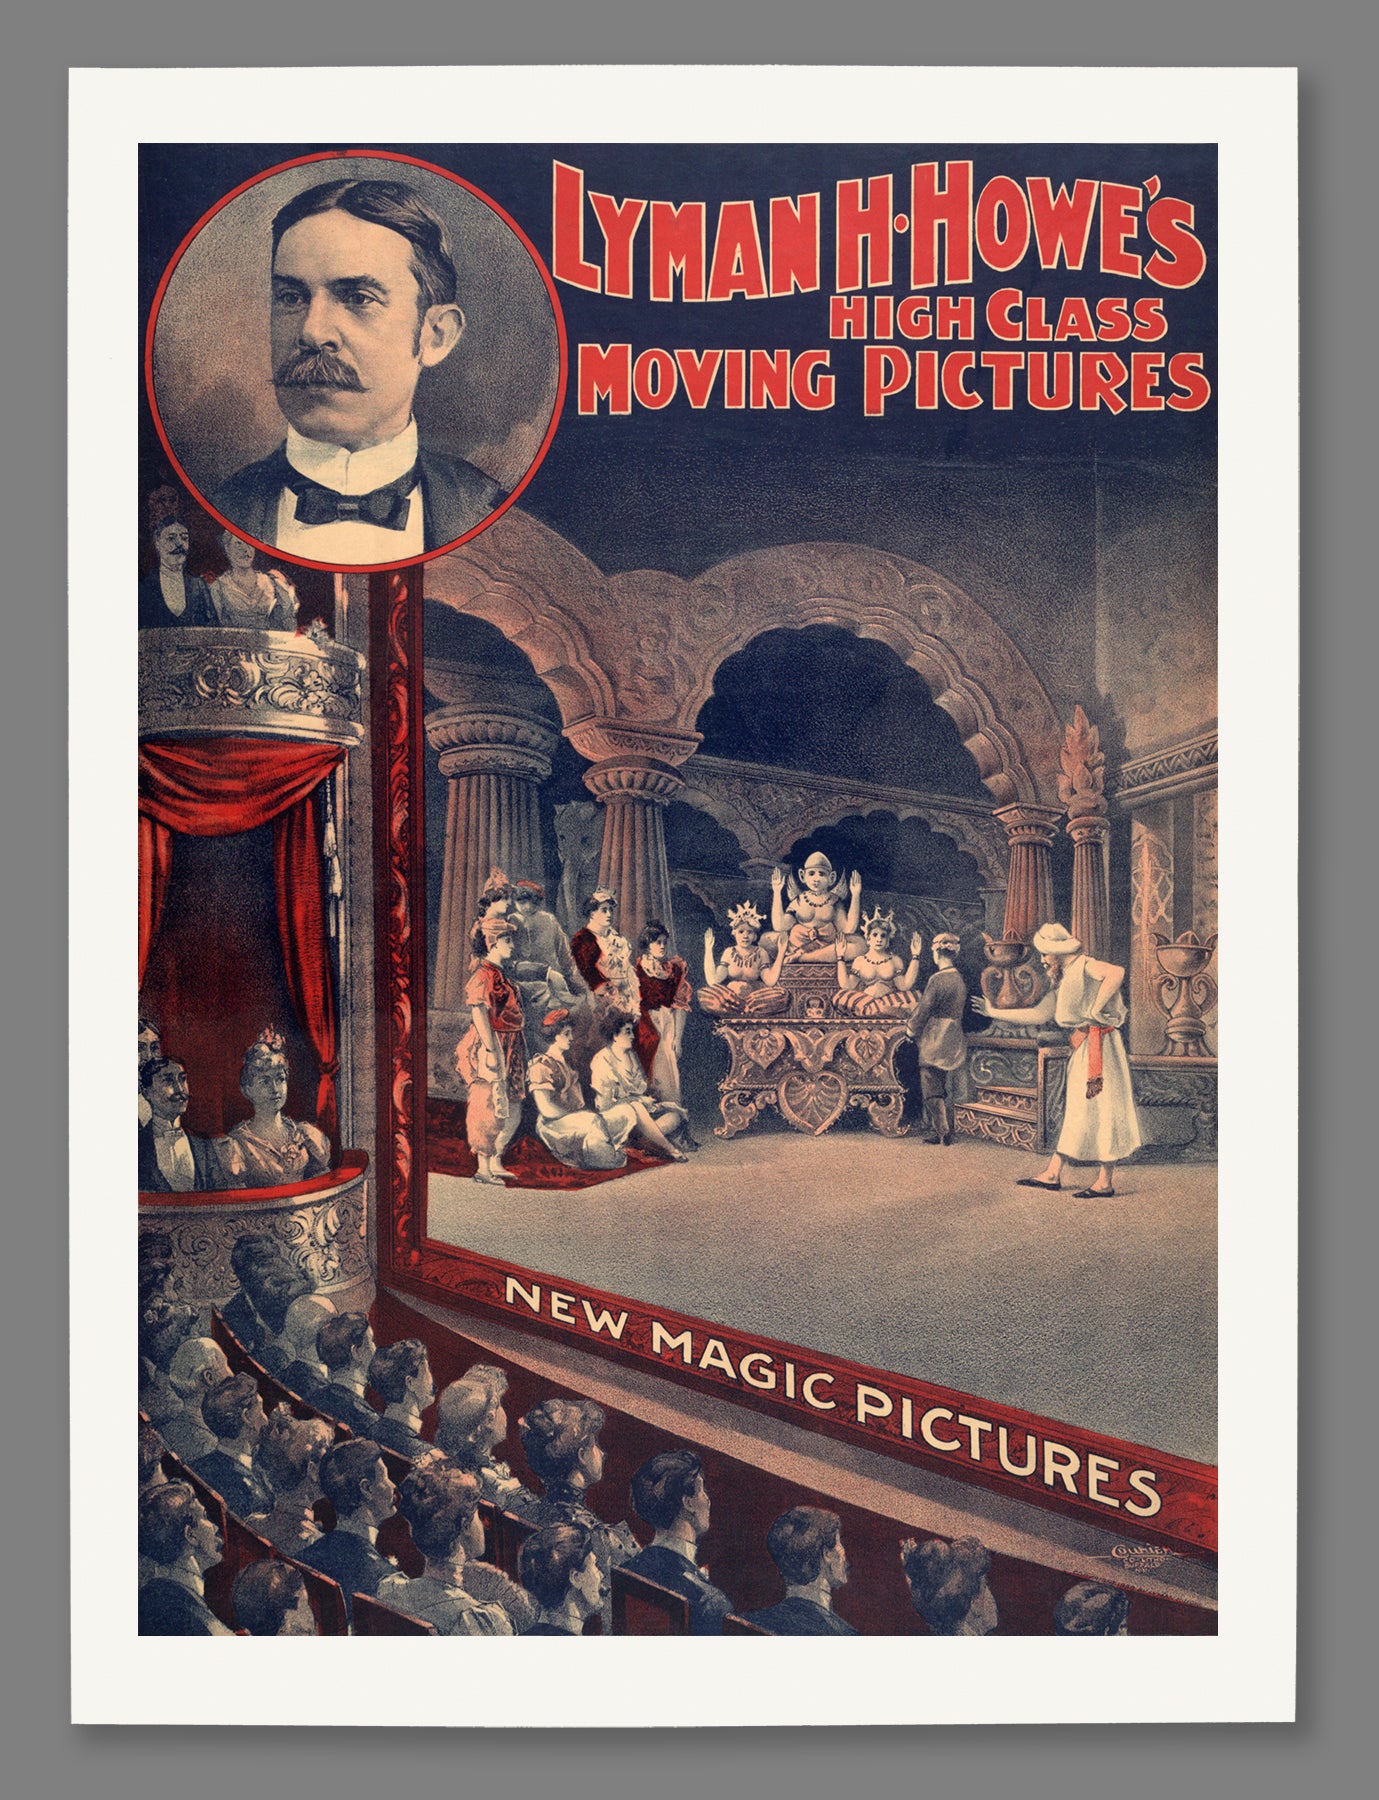 A paper print of a vintage poster featuring a theather of people watching "new magic pictures"